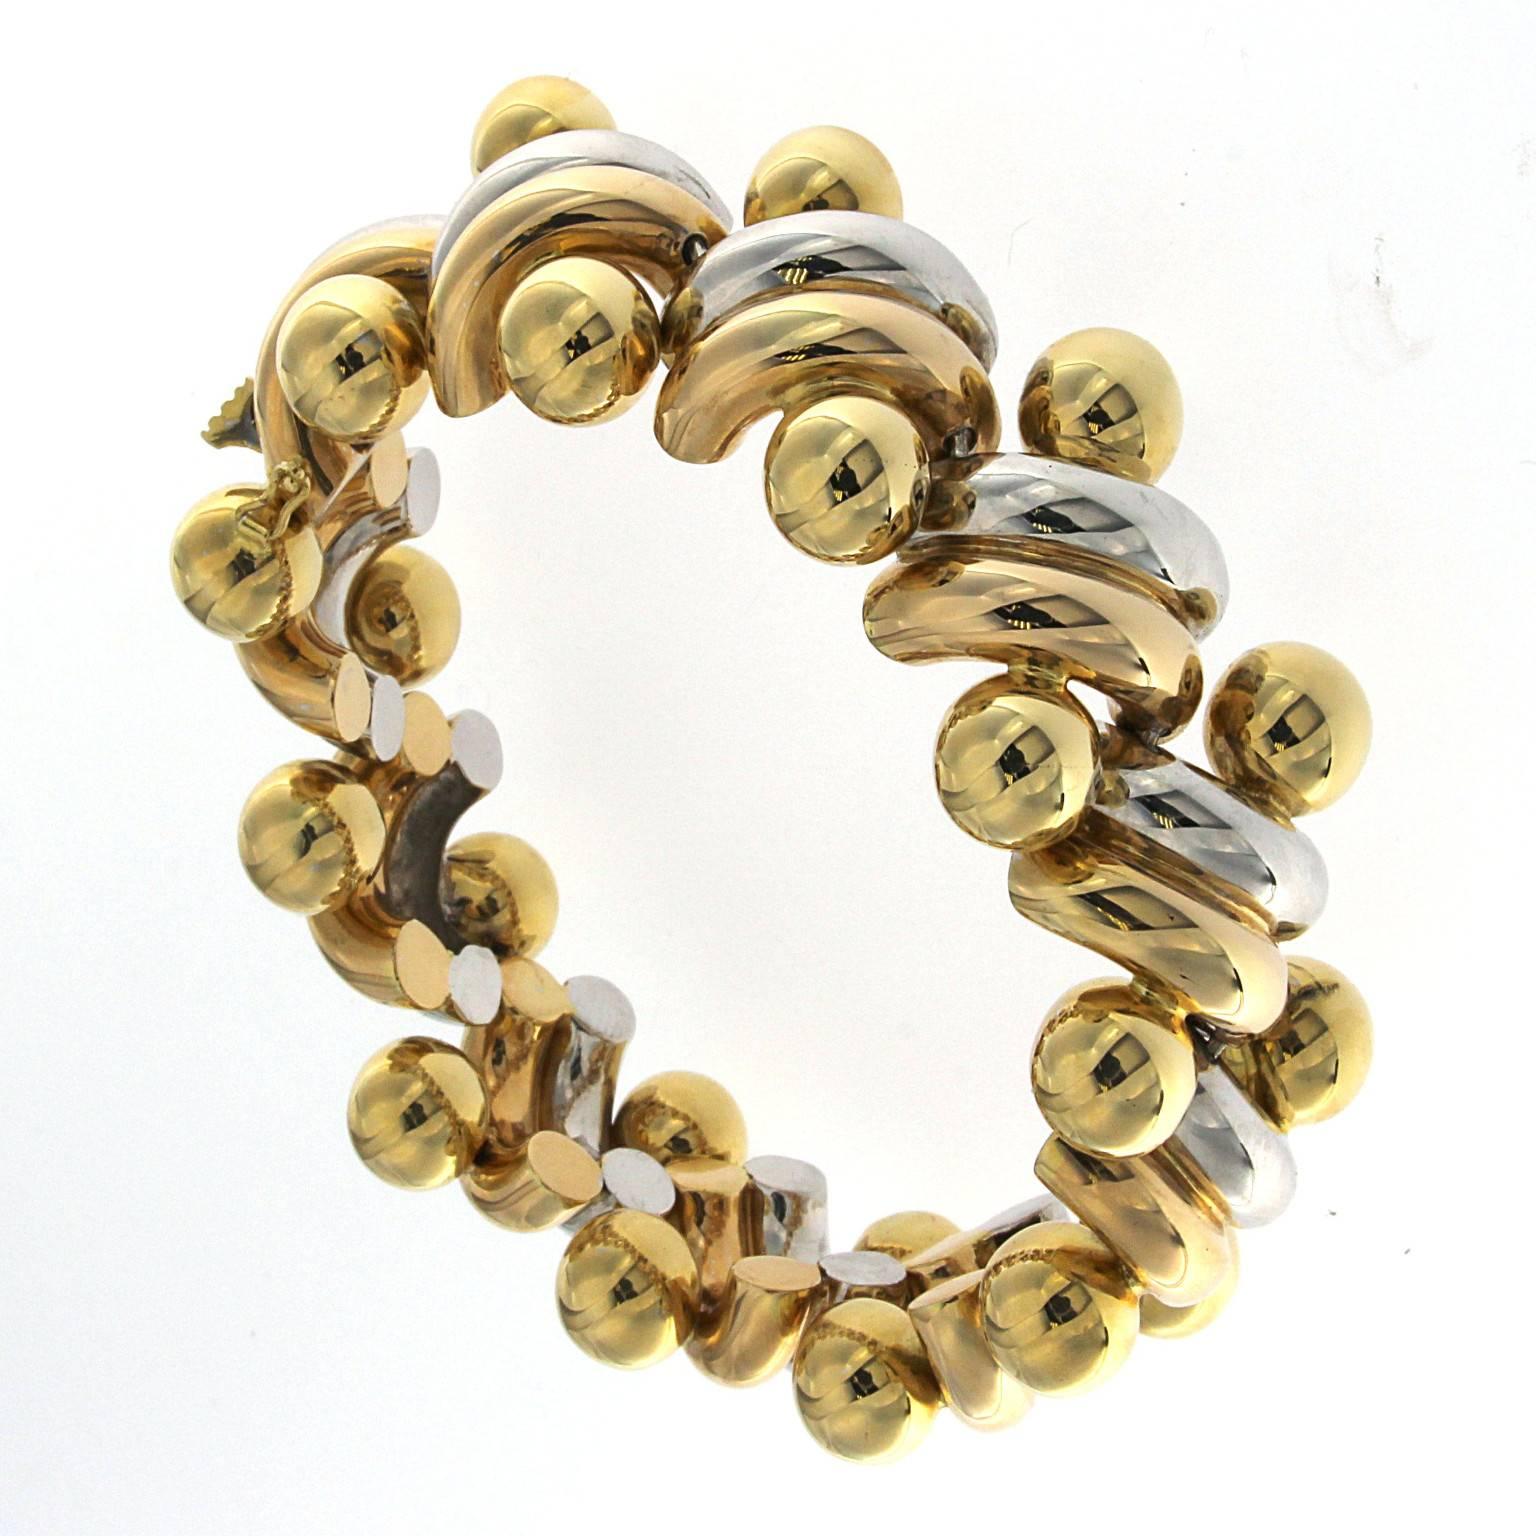 Wonderful 18kt gold bracelet in yellow, white and rose tone gold from the 70s
Total weight of gold: gr 89.40
Stamp: 750, 10 MI